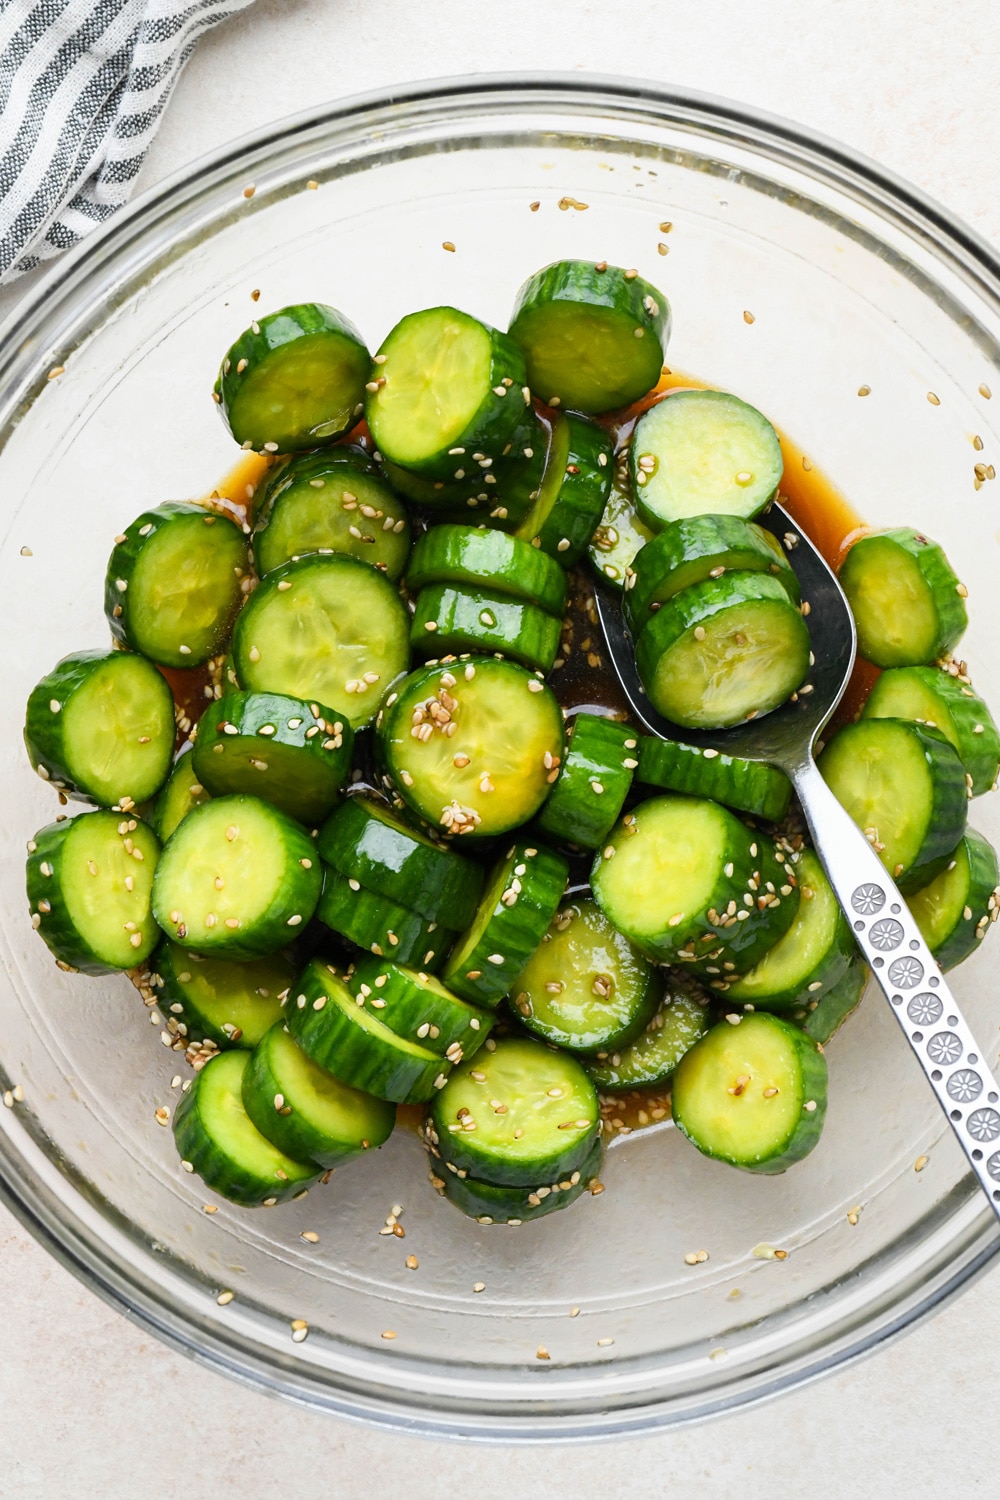 How to make cucumber sesame salad: Dressing poured over sliced cucumbers in a medium sized glass bowl, after marinating.